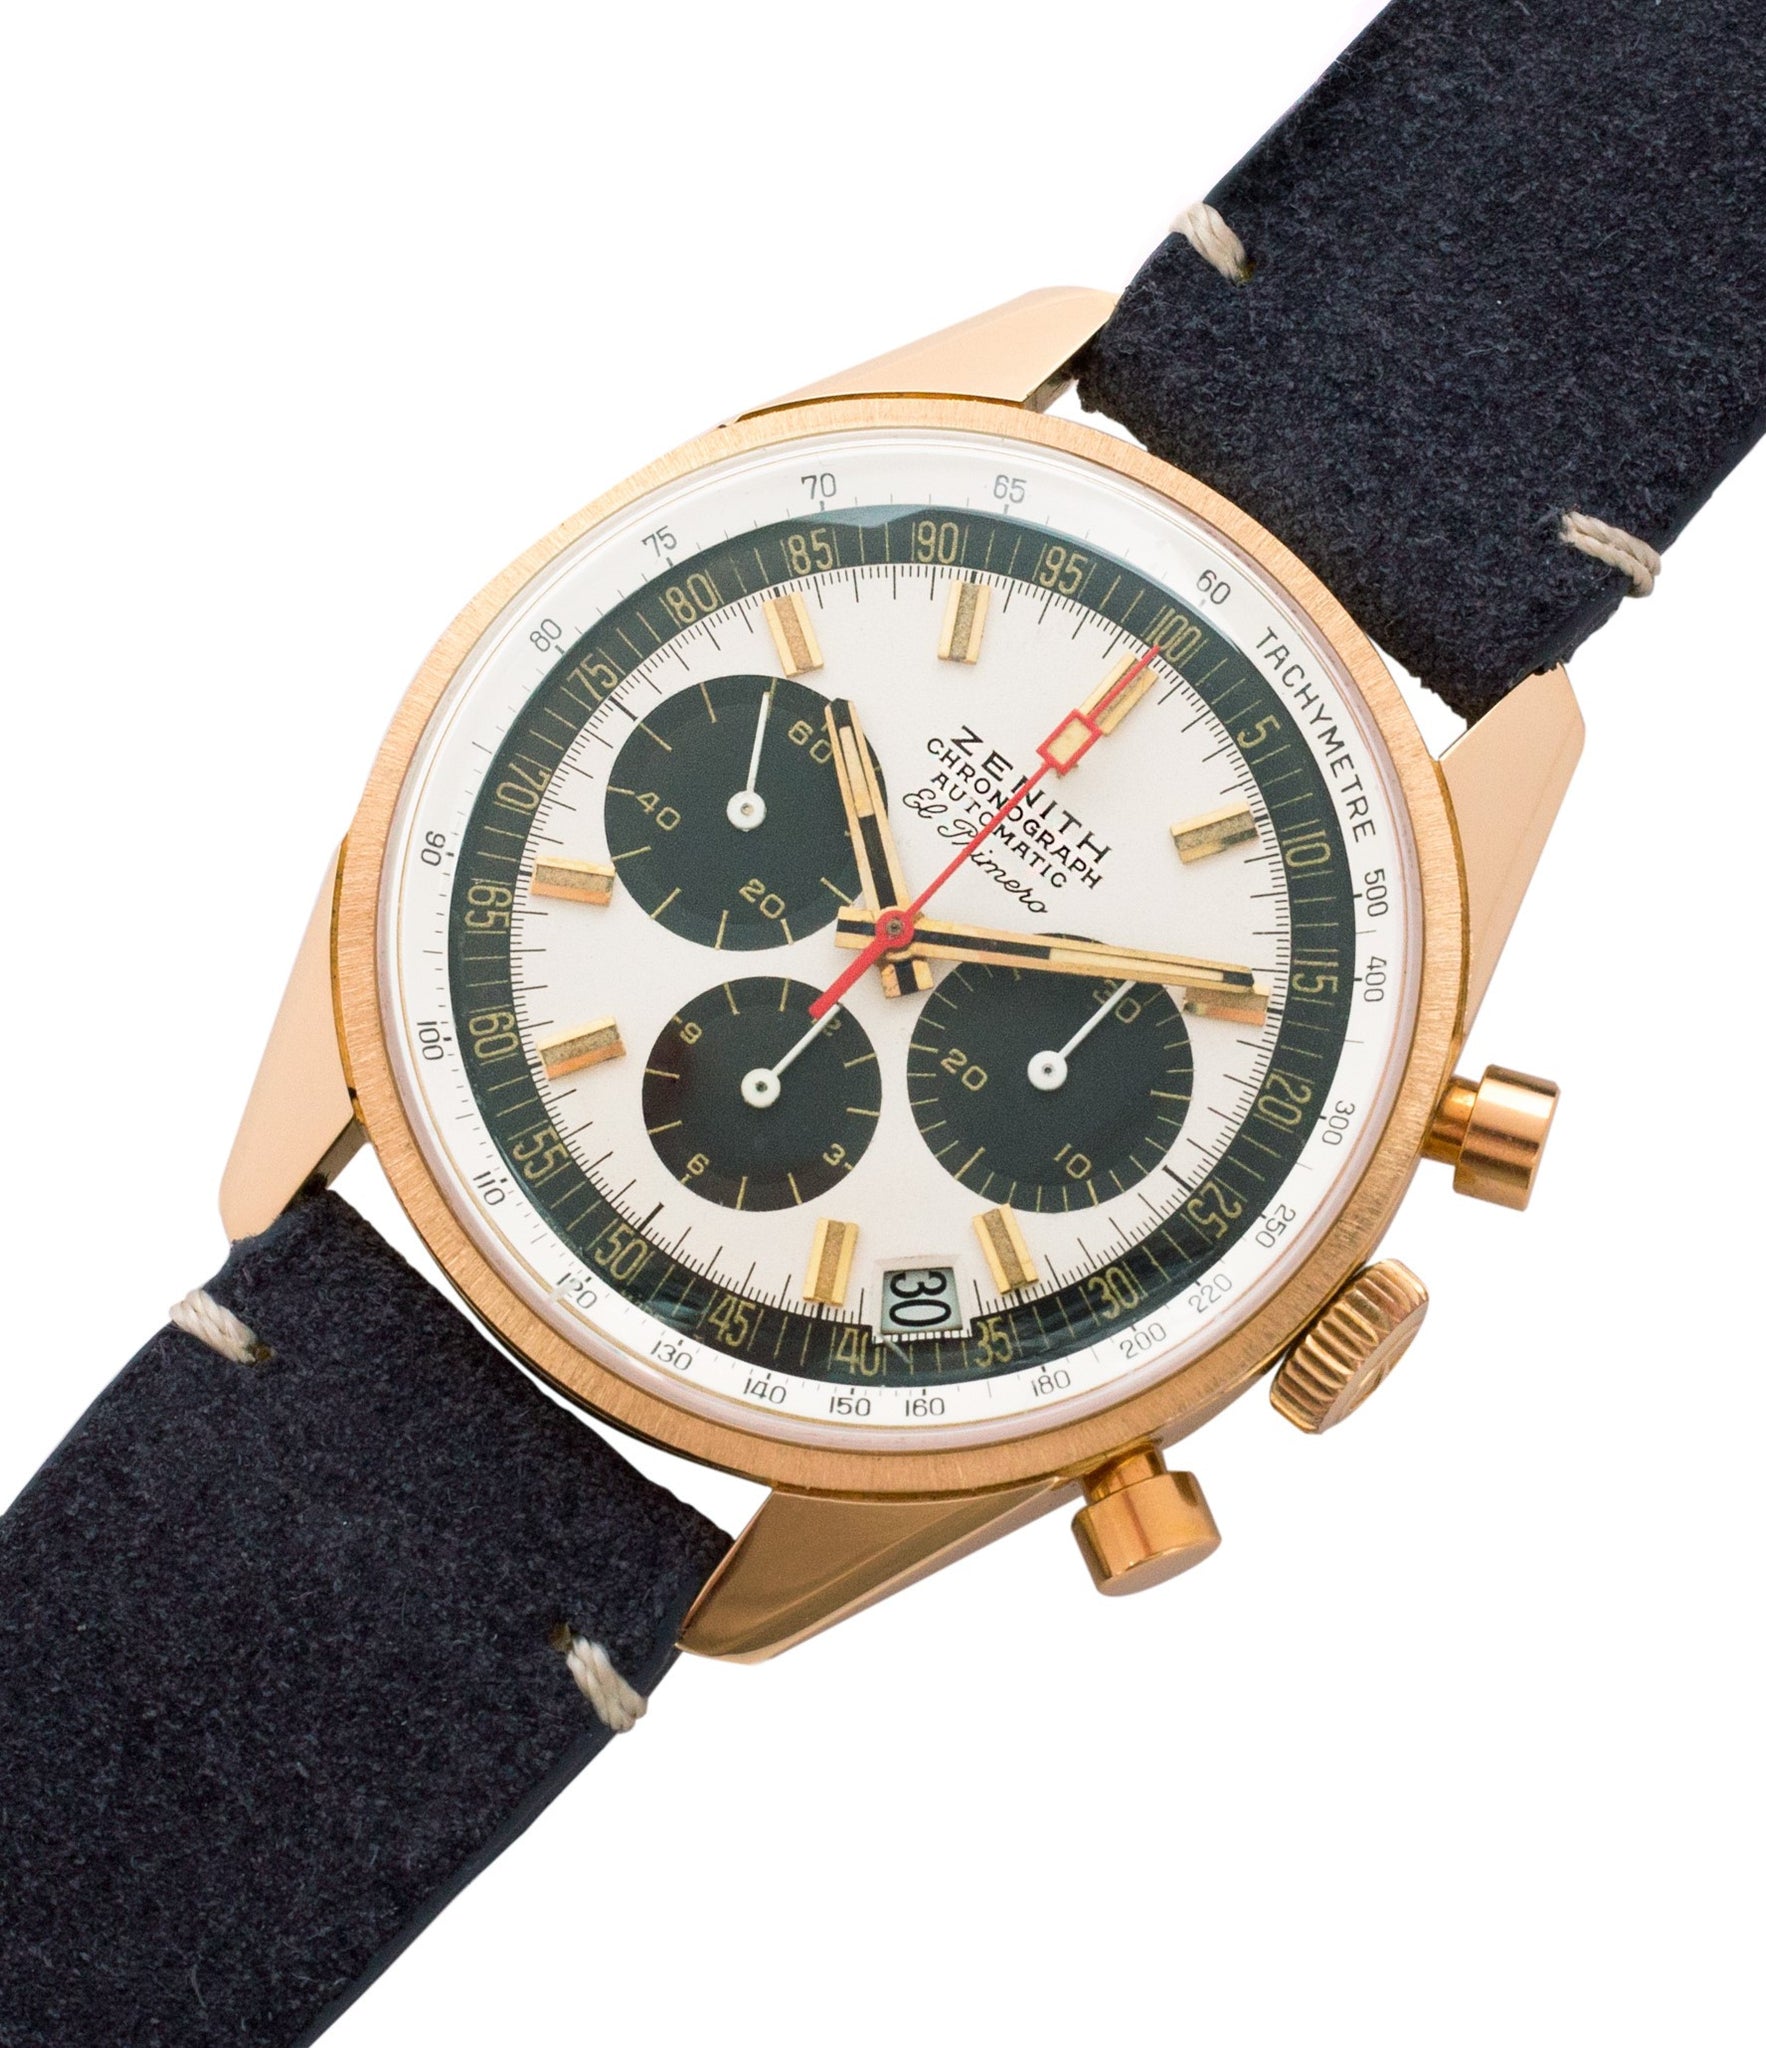 buy yellow gold Zenith El Primero G381 rare vintage chronograph date watch for sale online at A Collected Man London vintage watch specialist